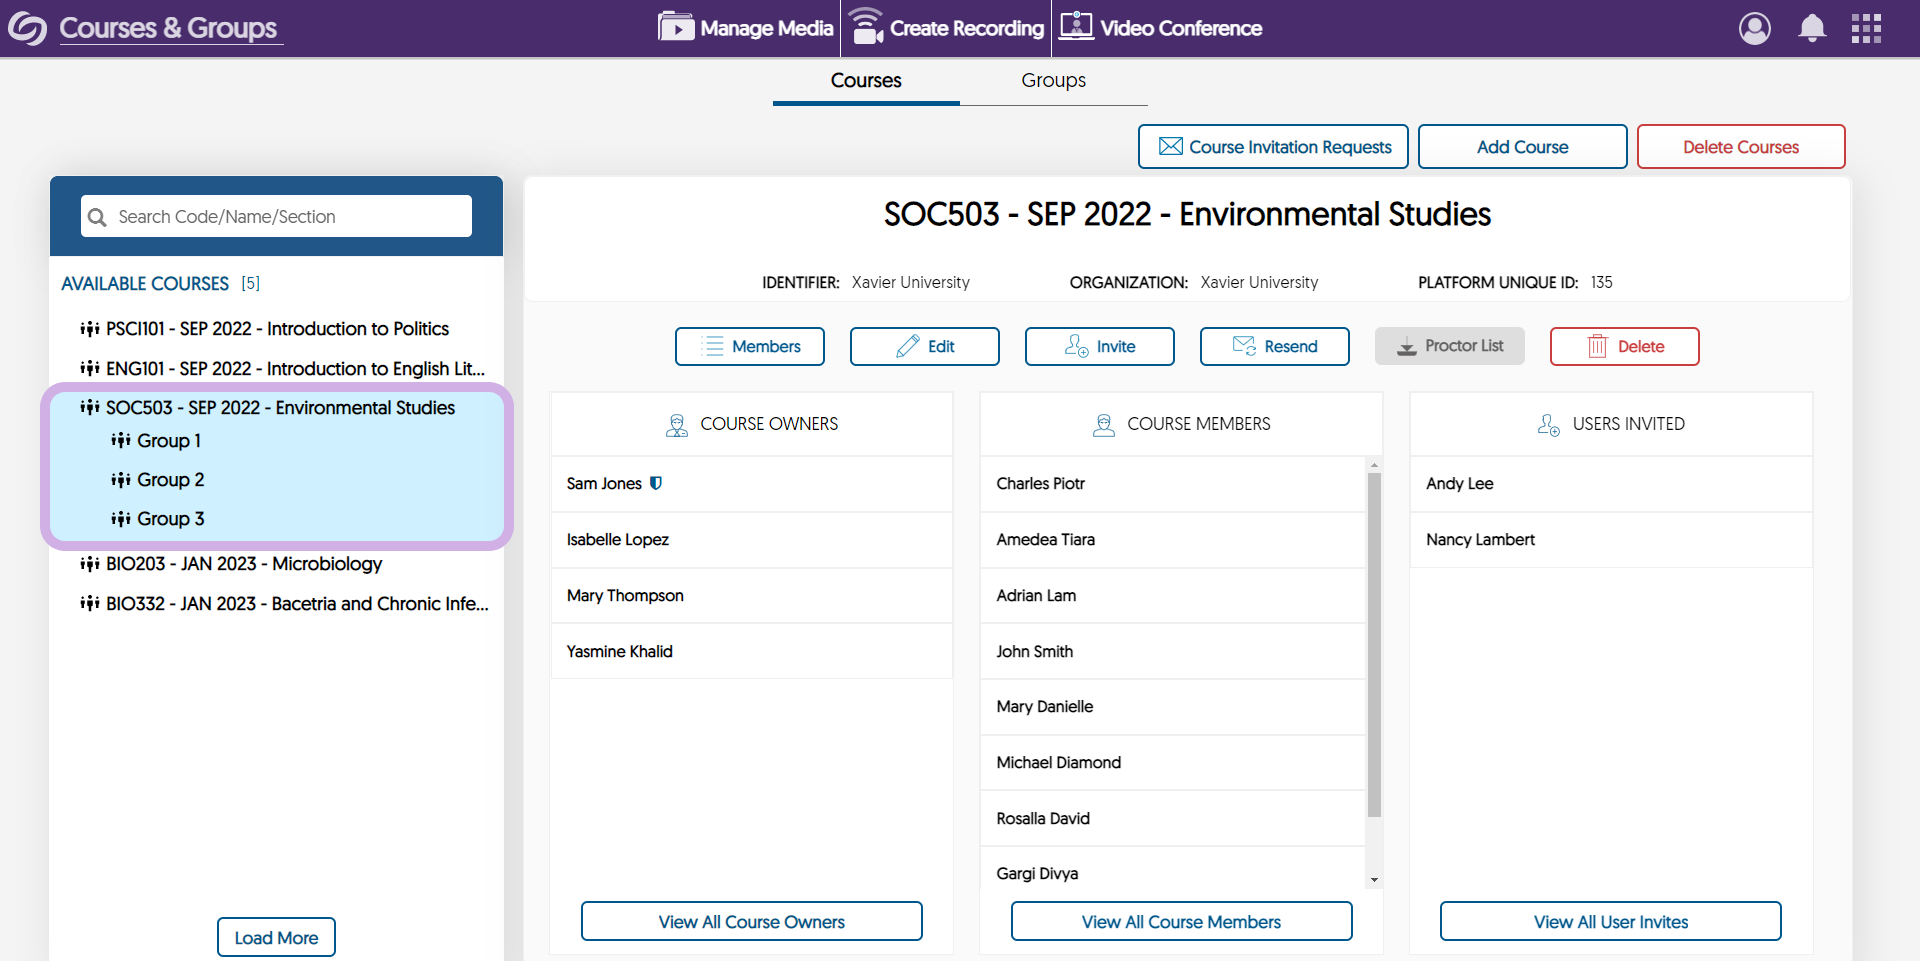 In the available courses menu located on the left side of the screen, a course is selected. Course owners, course members, and users invited are shown in three columns